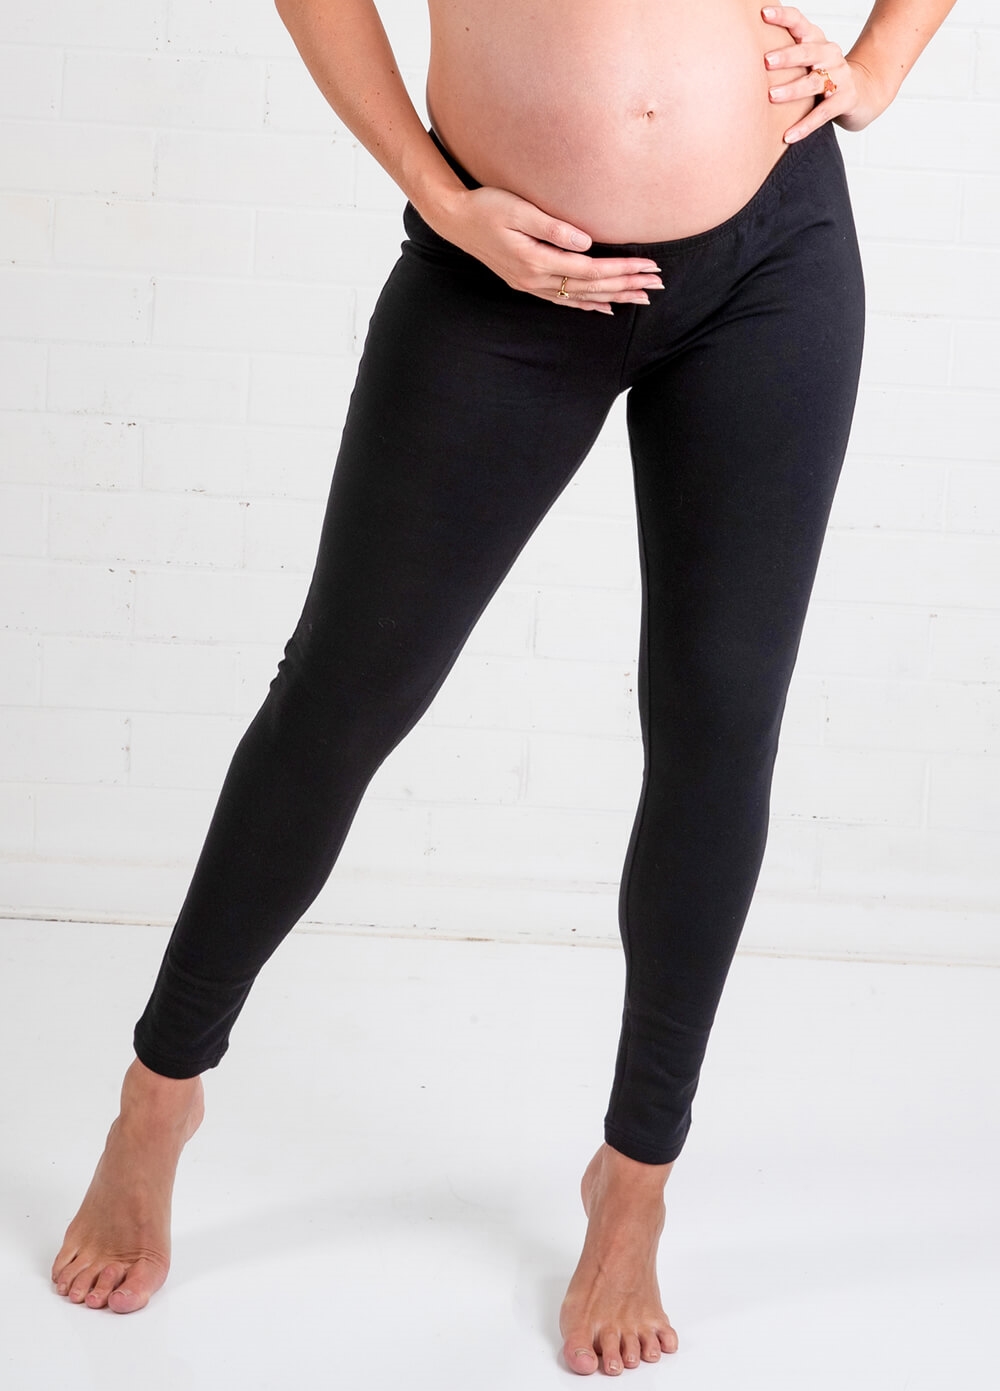 Enerful Maternity Fleece Lined Leggings for Women Over The Belly Workout  Winter Warm Thick Pregnancy Yoga Pants with Pockets